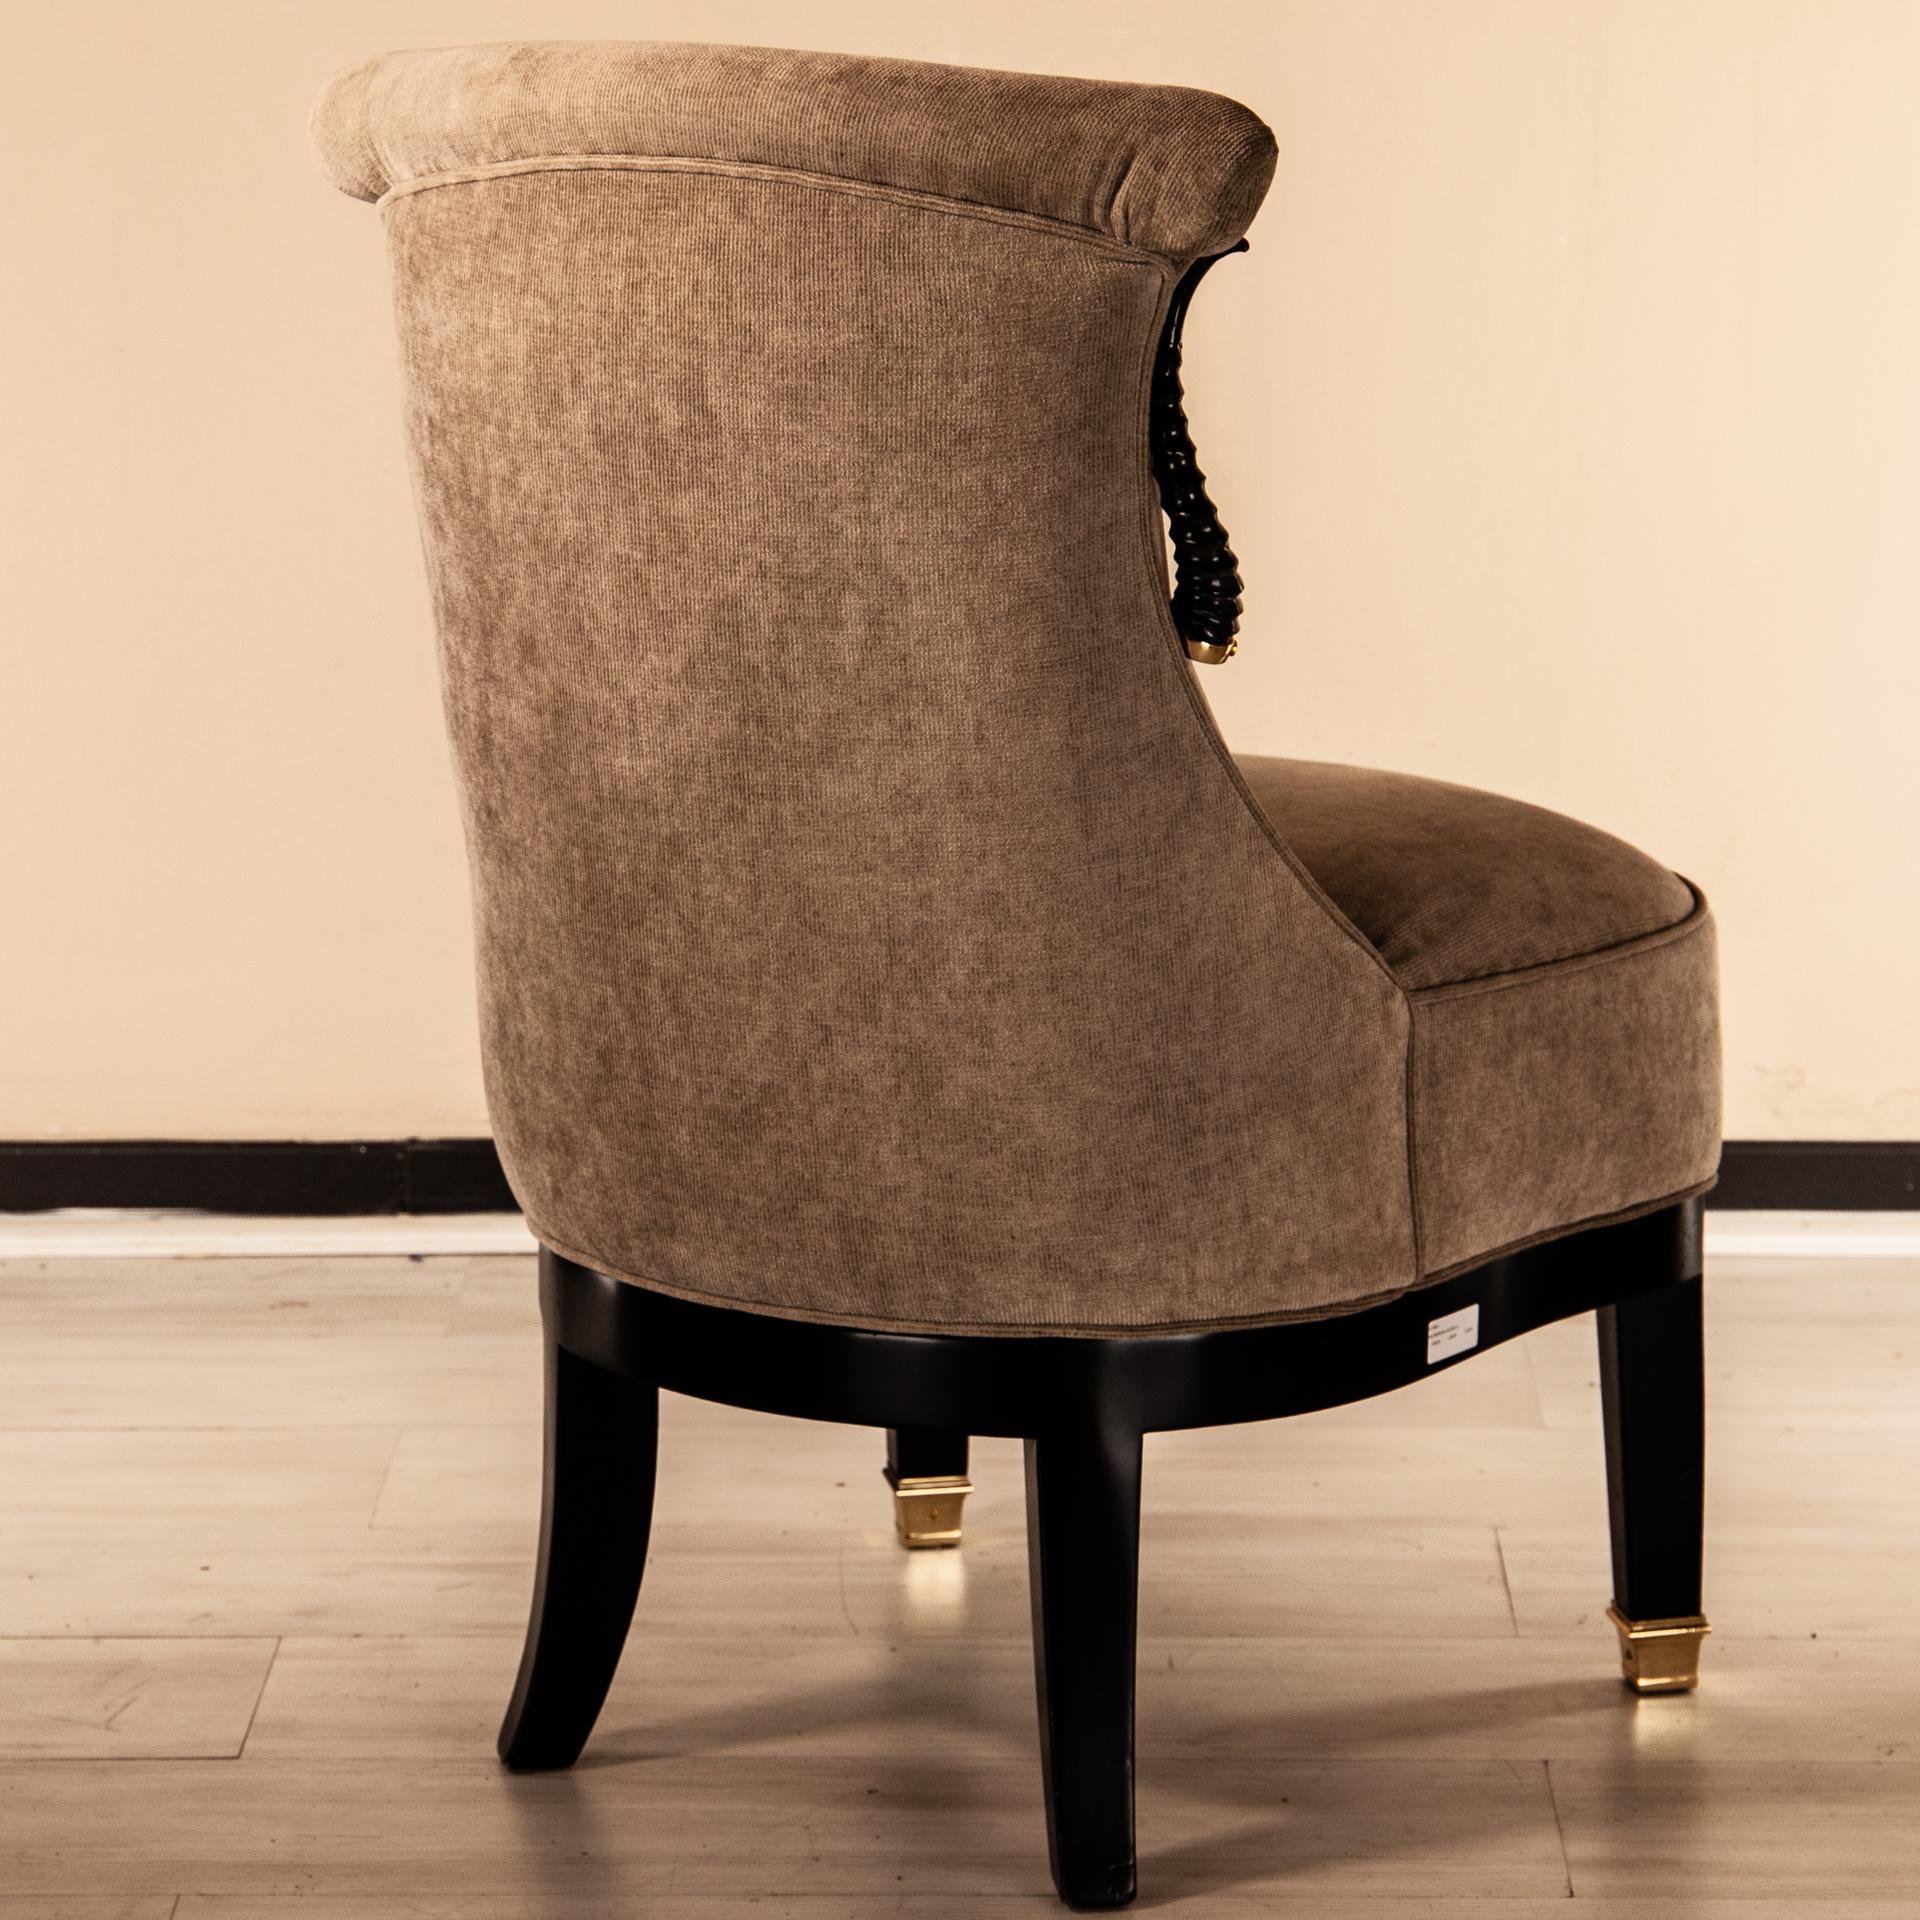 Small Upholstered Chair Gazzella, Natural Horn, Solid Brass Finials and Details For Sale 4